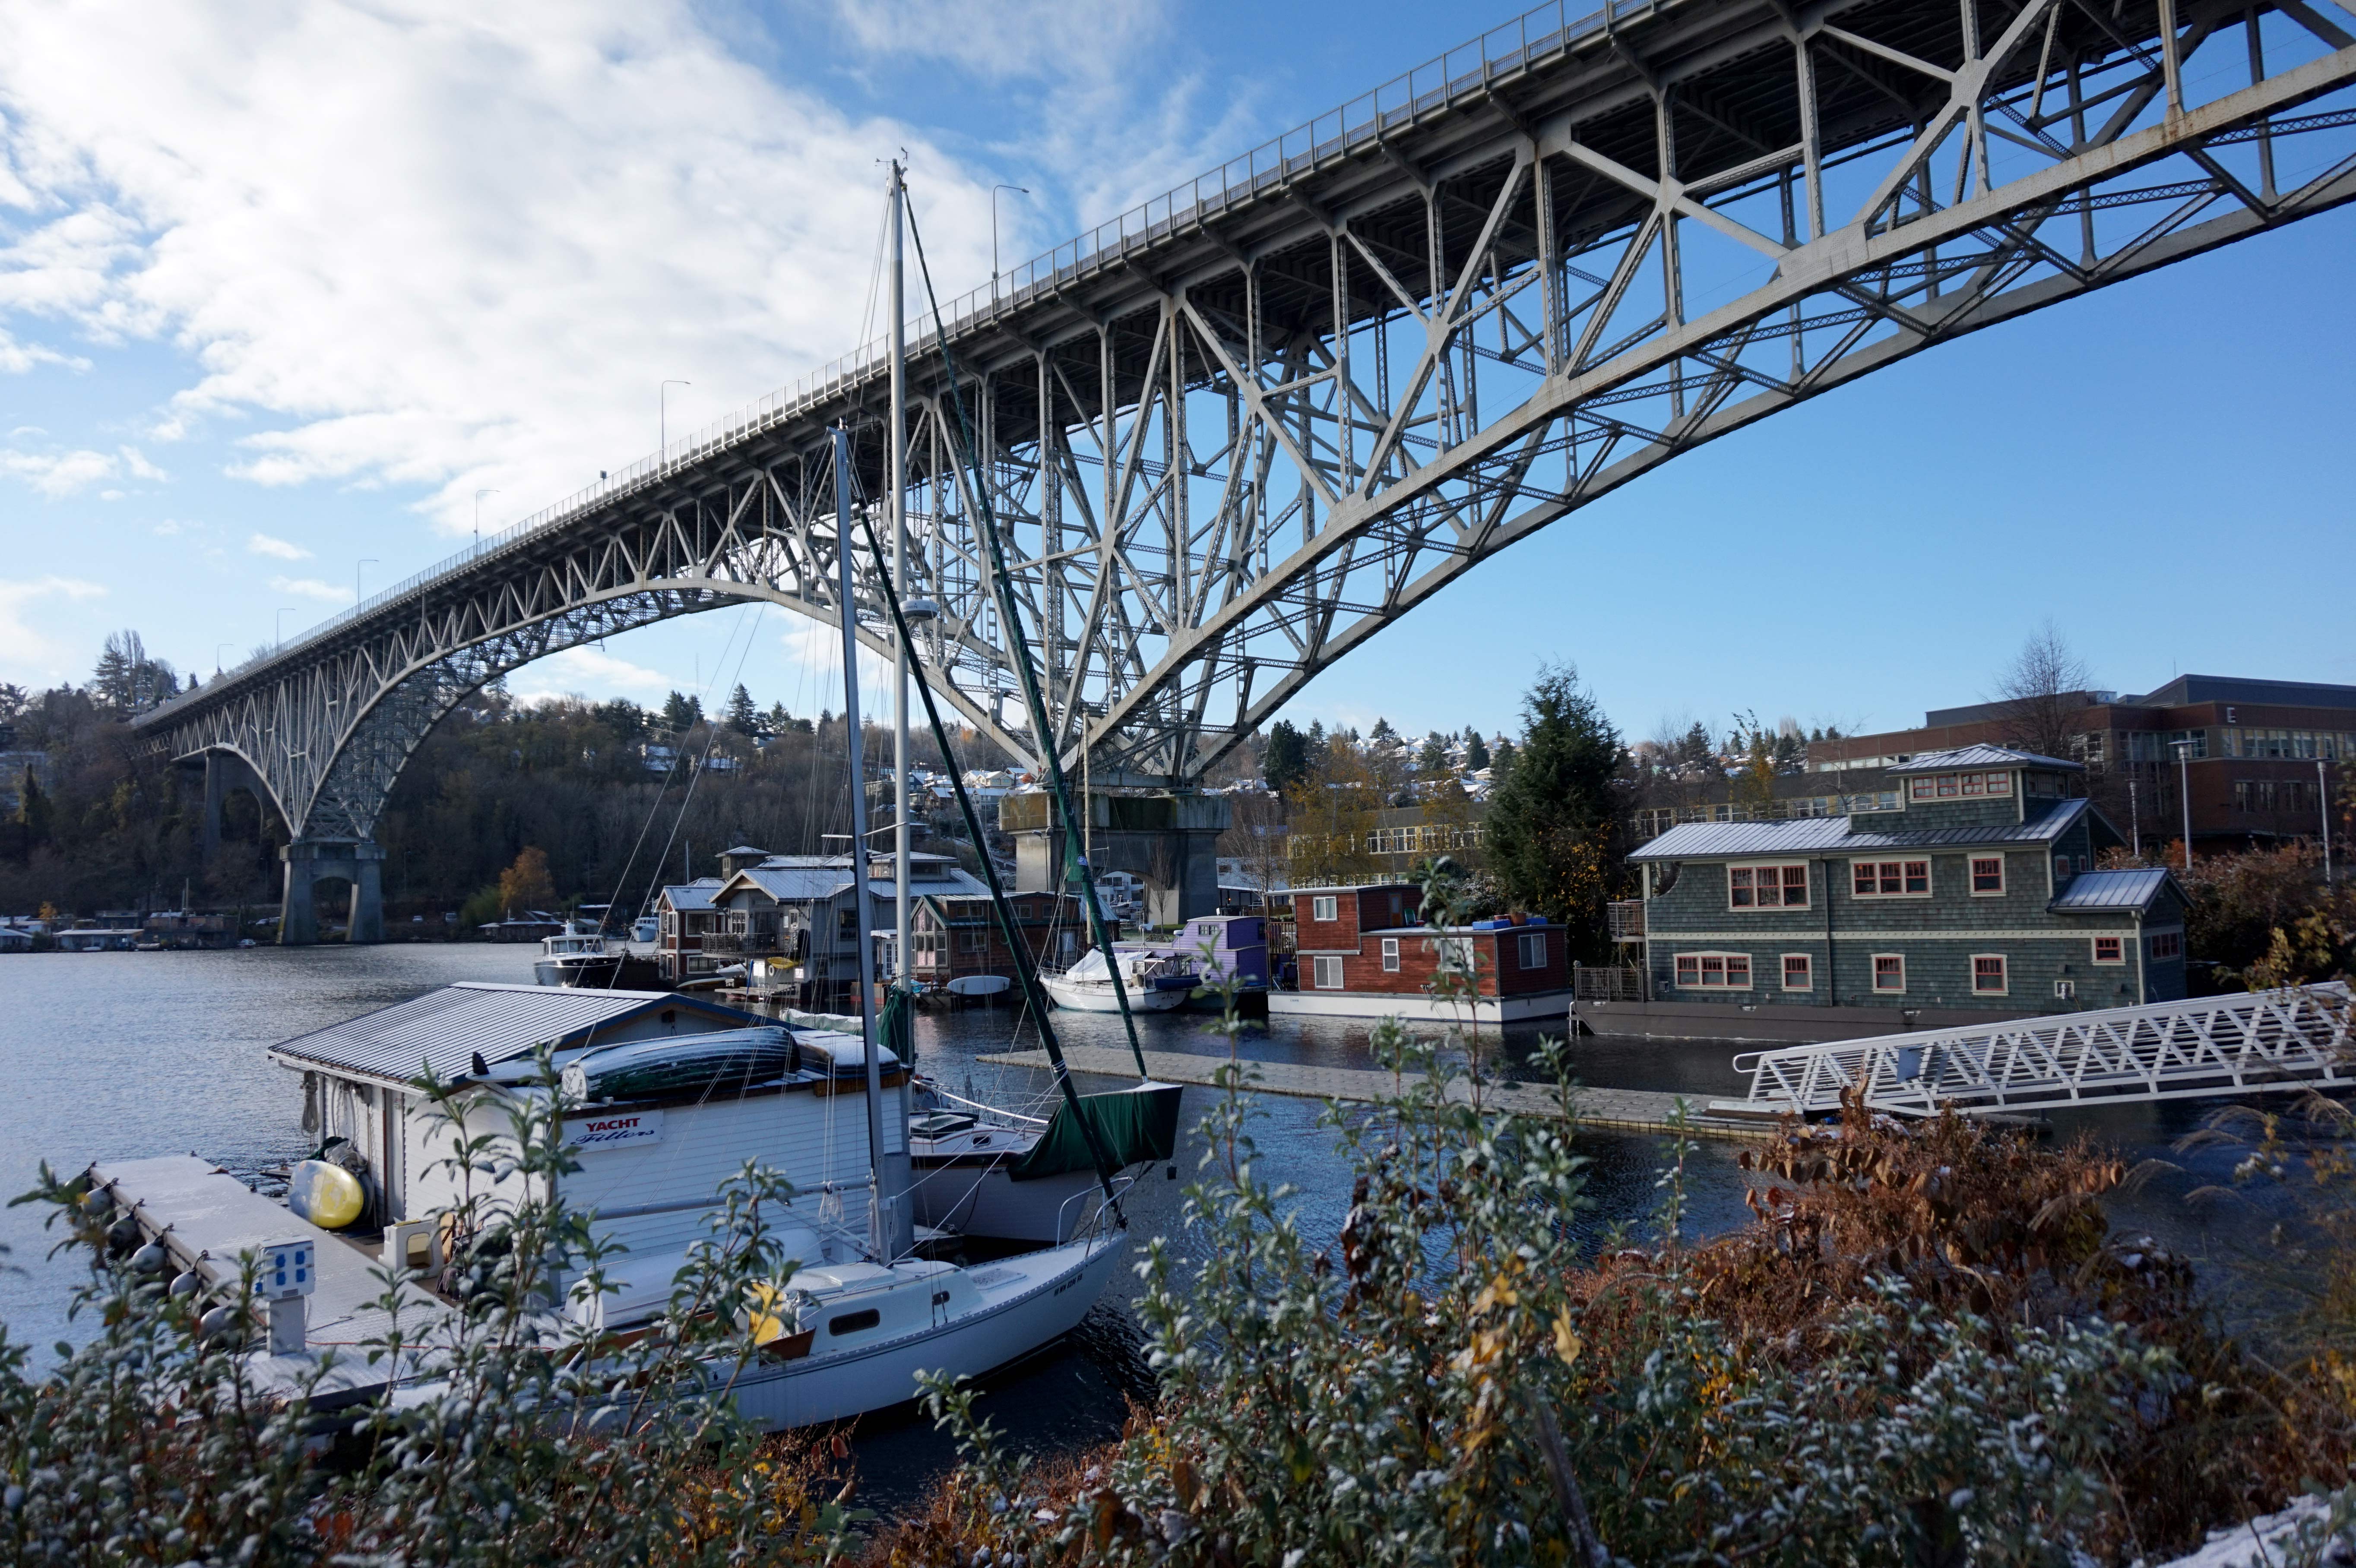 Houseboats docked in Lake Union near the Burke-Gilman Trail. Image by Brendan Sainsbury / Lonely Planet